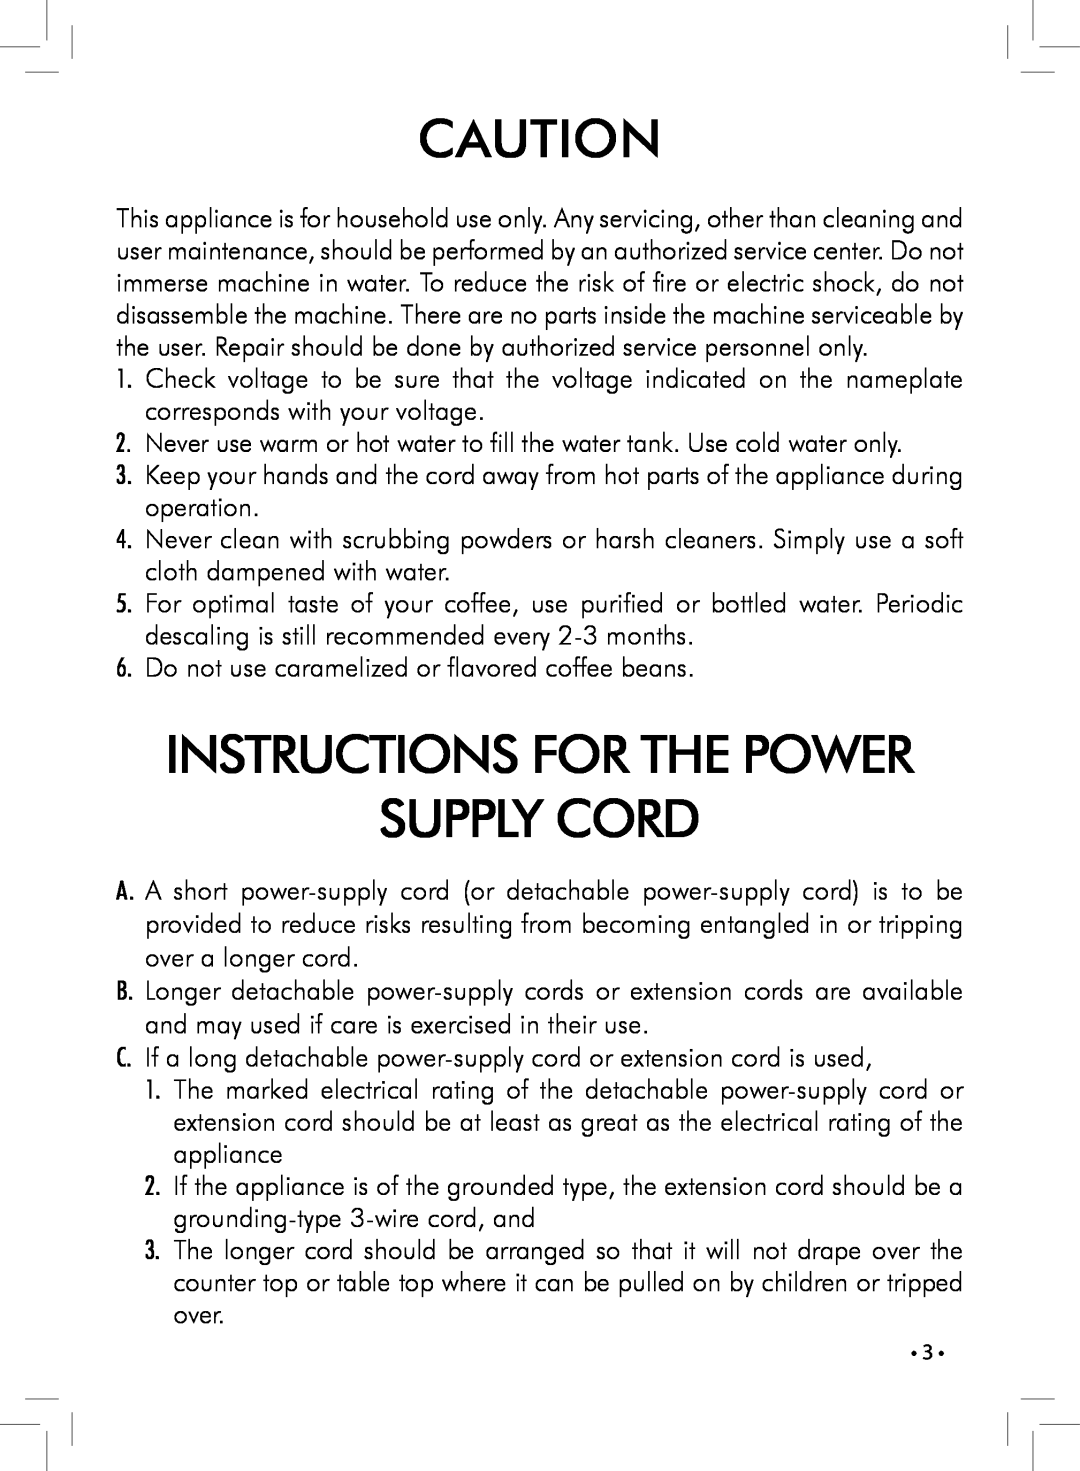 Saeco Coffee Makers HD8837, HD8836 manual Instructions For The Power Supply Cord 